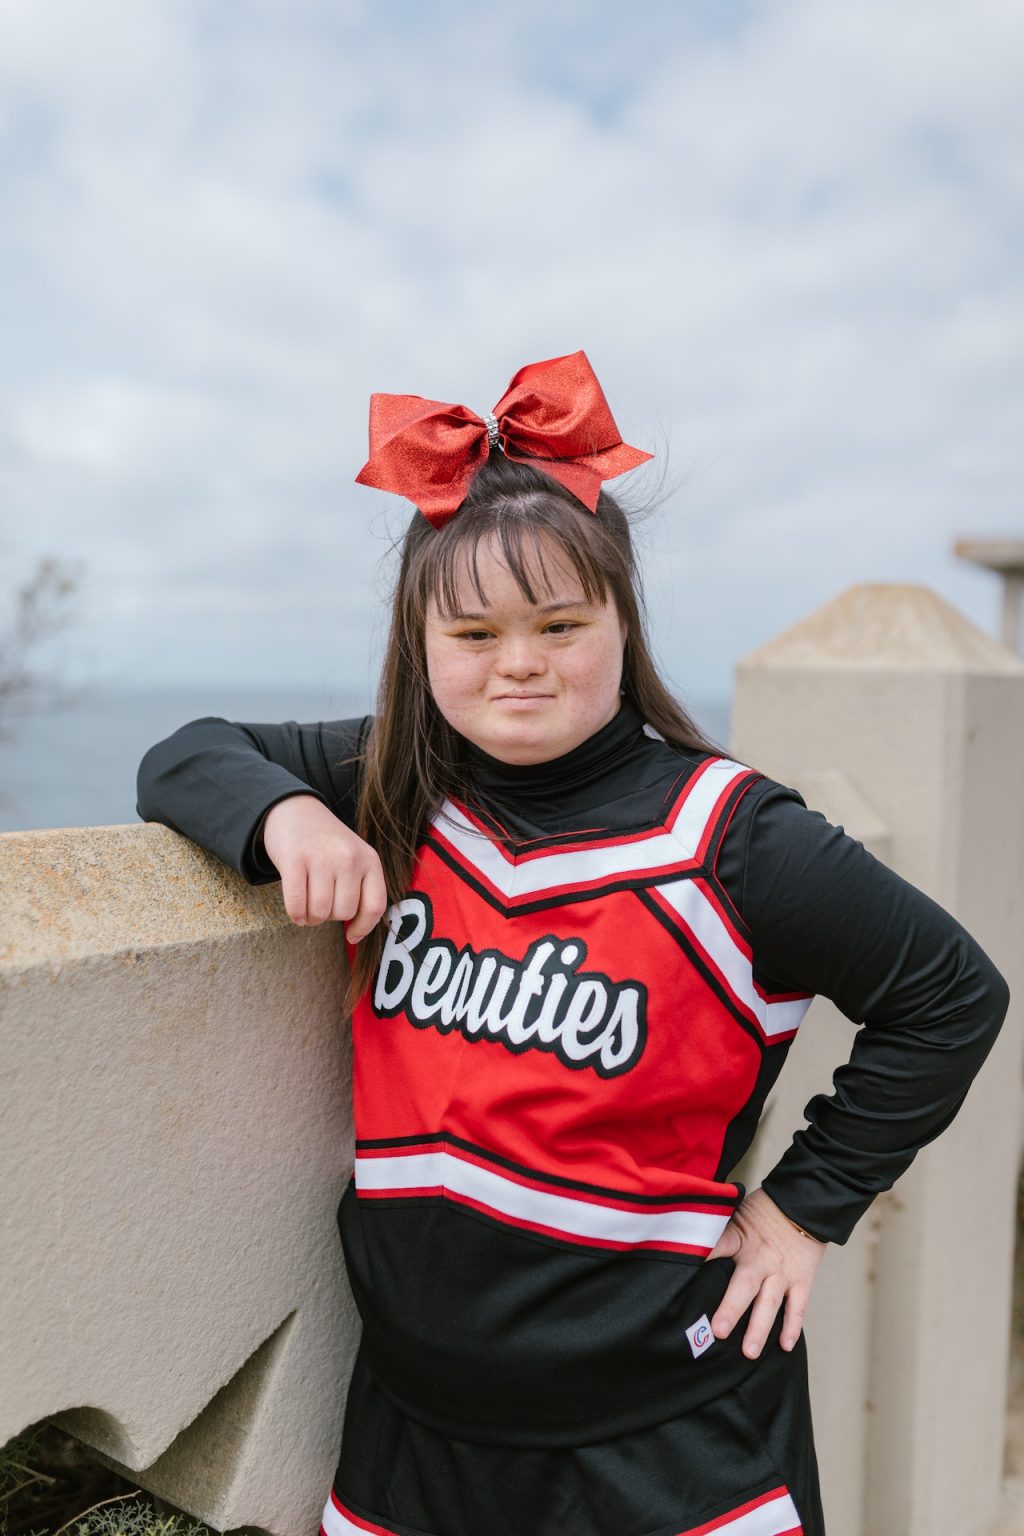 Girl with down syndrome dressed as a cheerleader and having fun with her NDIS service provider